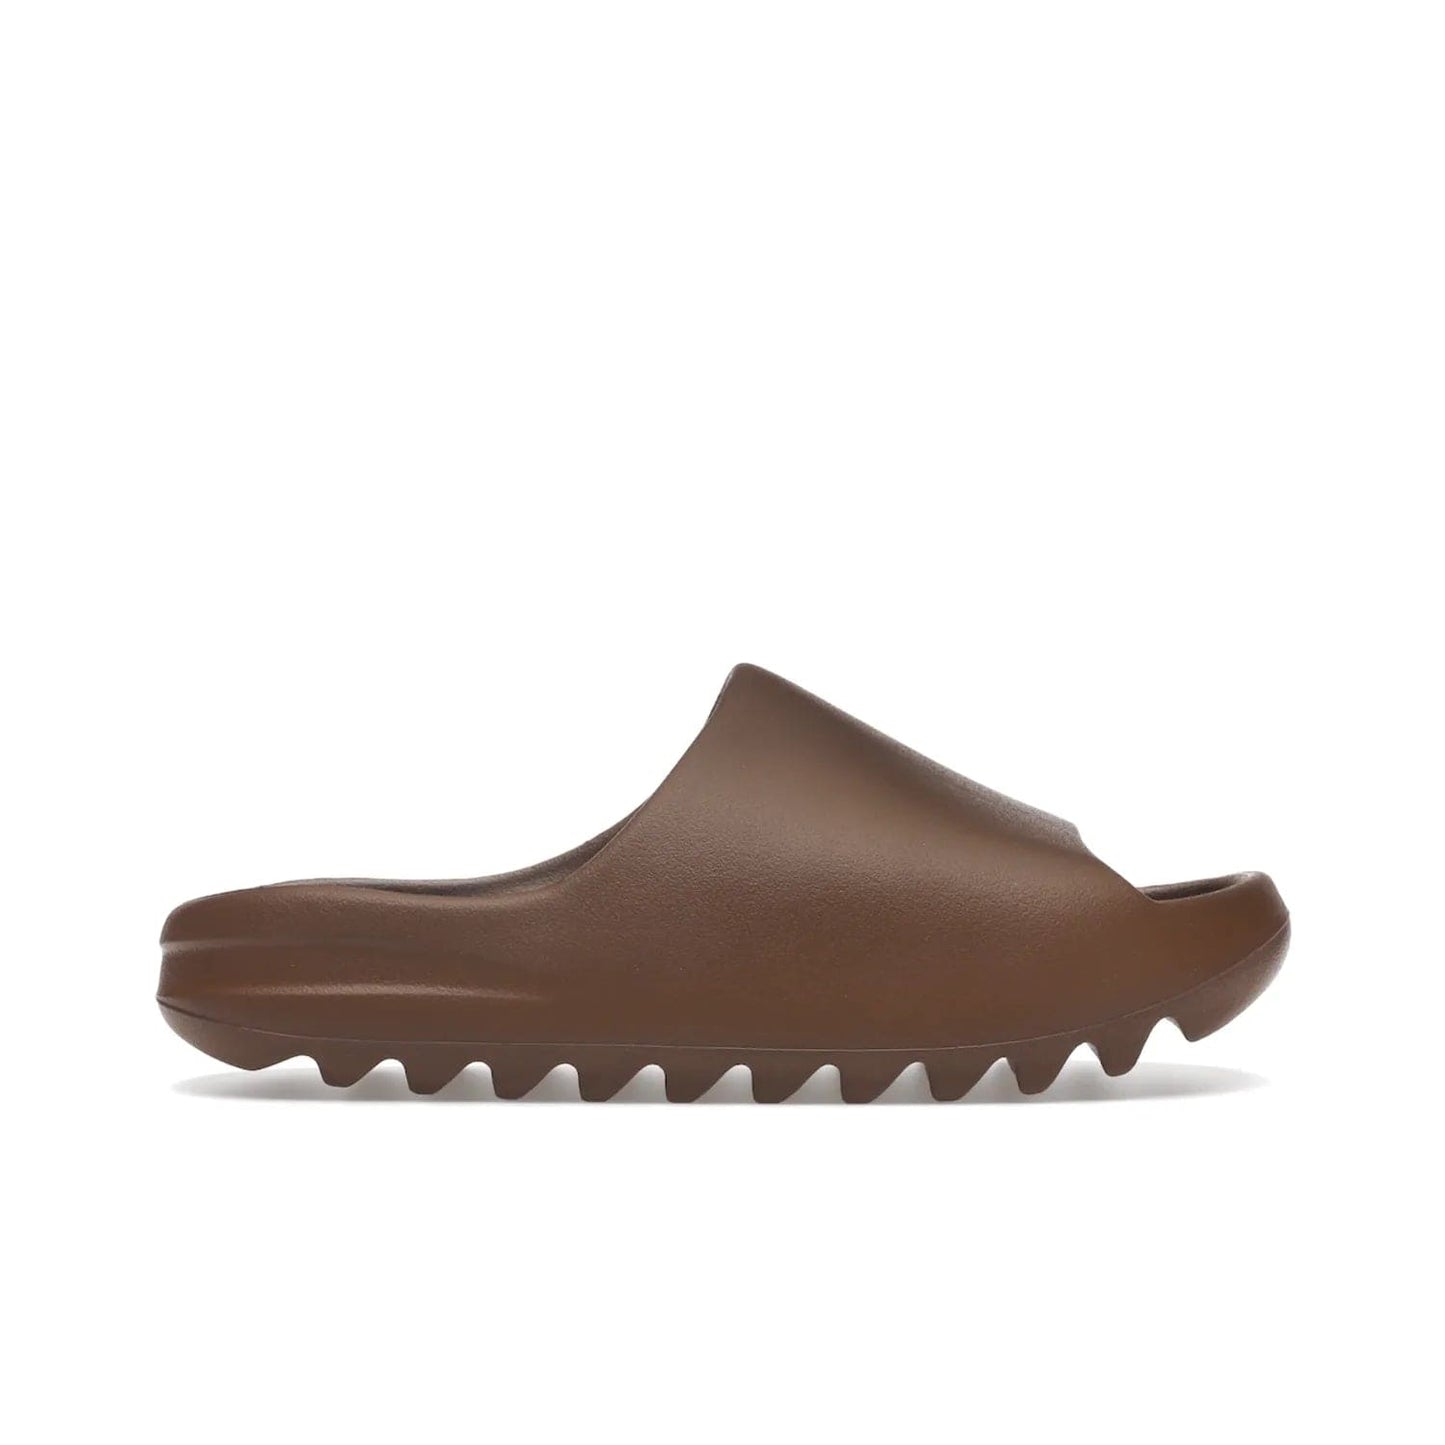 adidas Yeezy Slide Flax - Image 1 - Only at www.BallersClubKickz.com - Score the perfect casual look with the adidas Yeezy Slide Flax. Made with lightweight injected EVA plus horizontal grooves underfoot for traction. Release on August 22, 2022. $70.